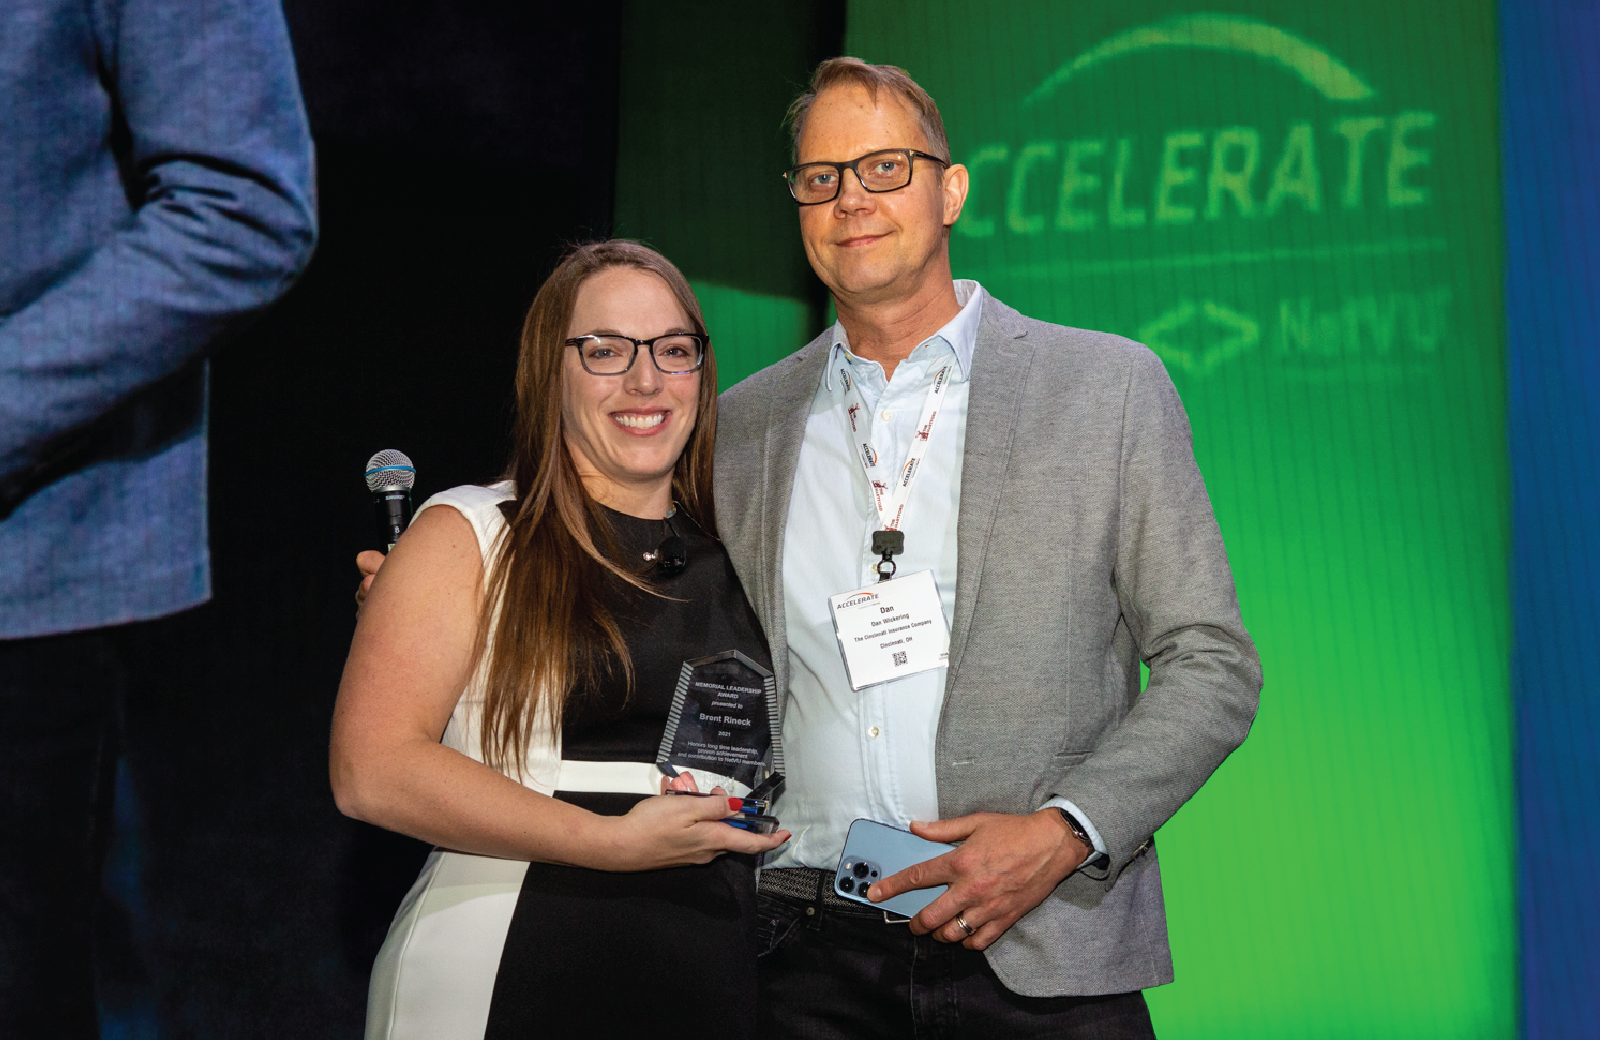 Pictured: NetVU Conference Steering Committee Chairman Jessica Jeffress and Brent Rineck's husband Dan Wickering who accepted Brent's award (posthumously) on his behalf.